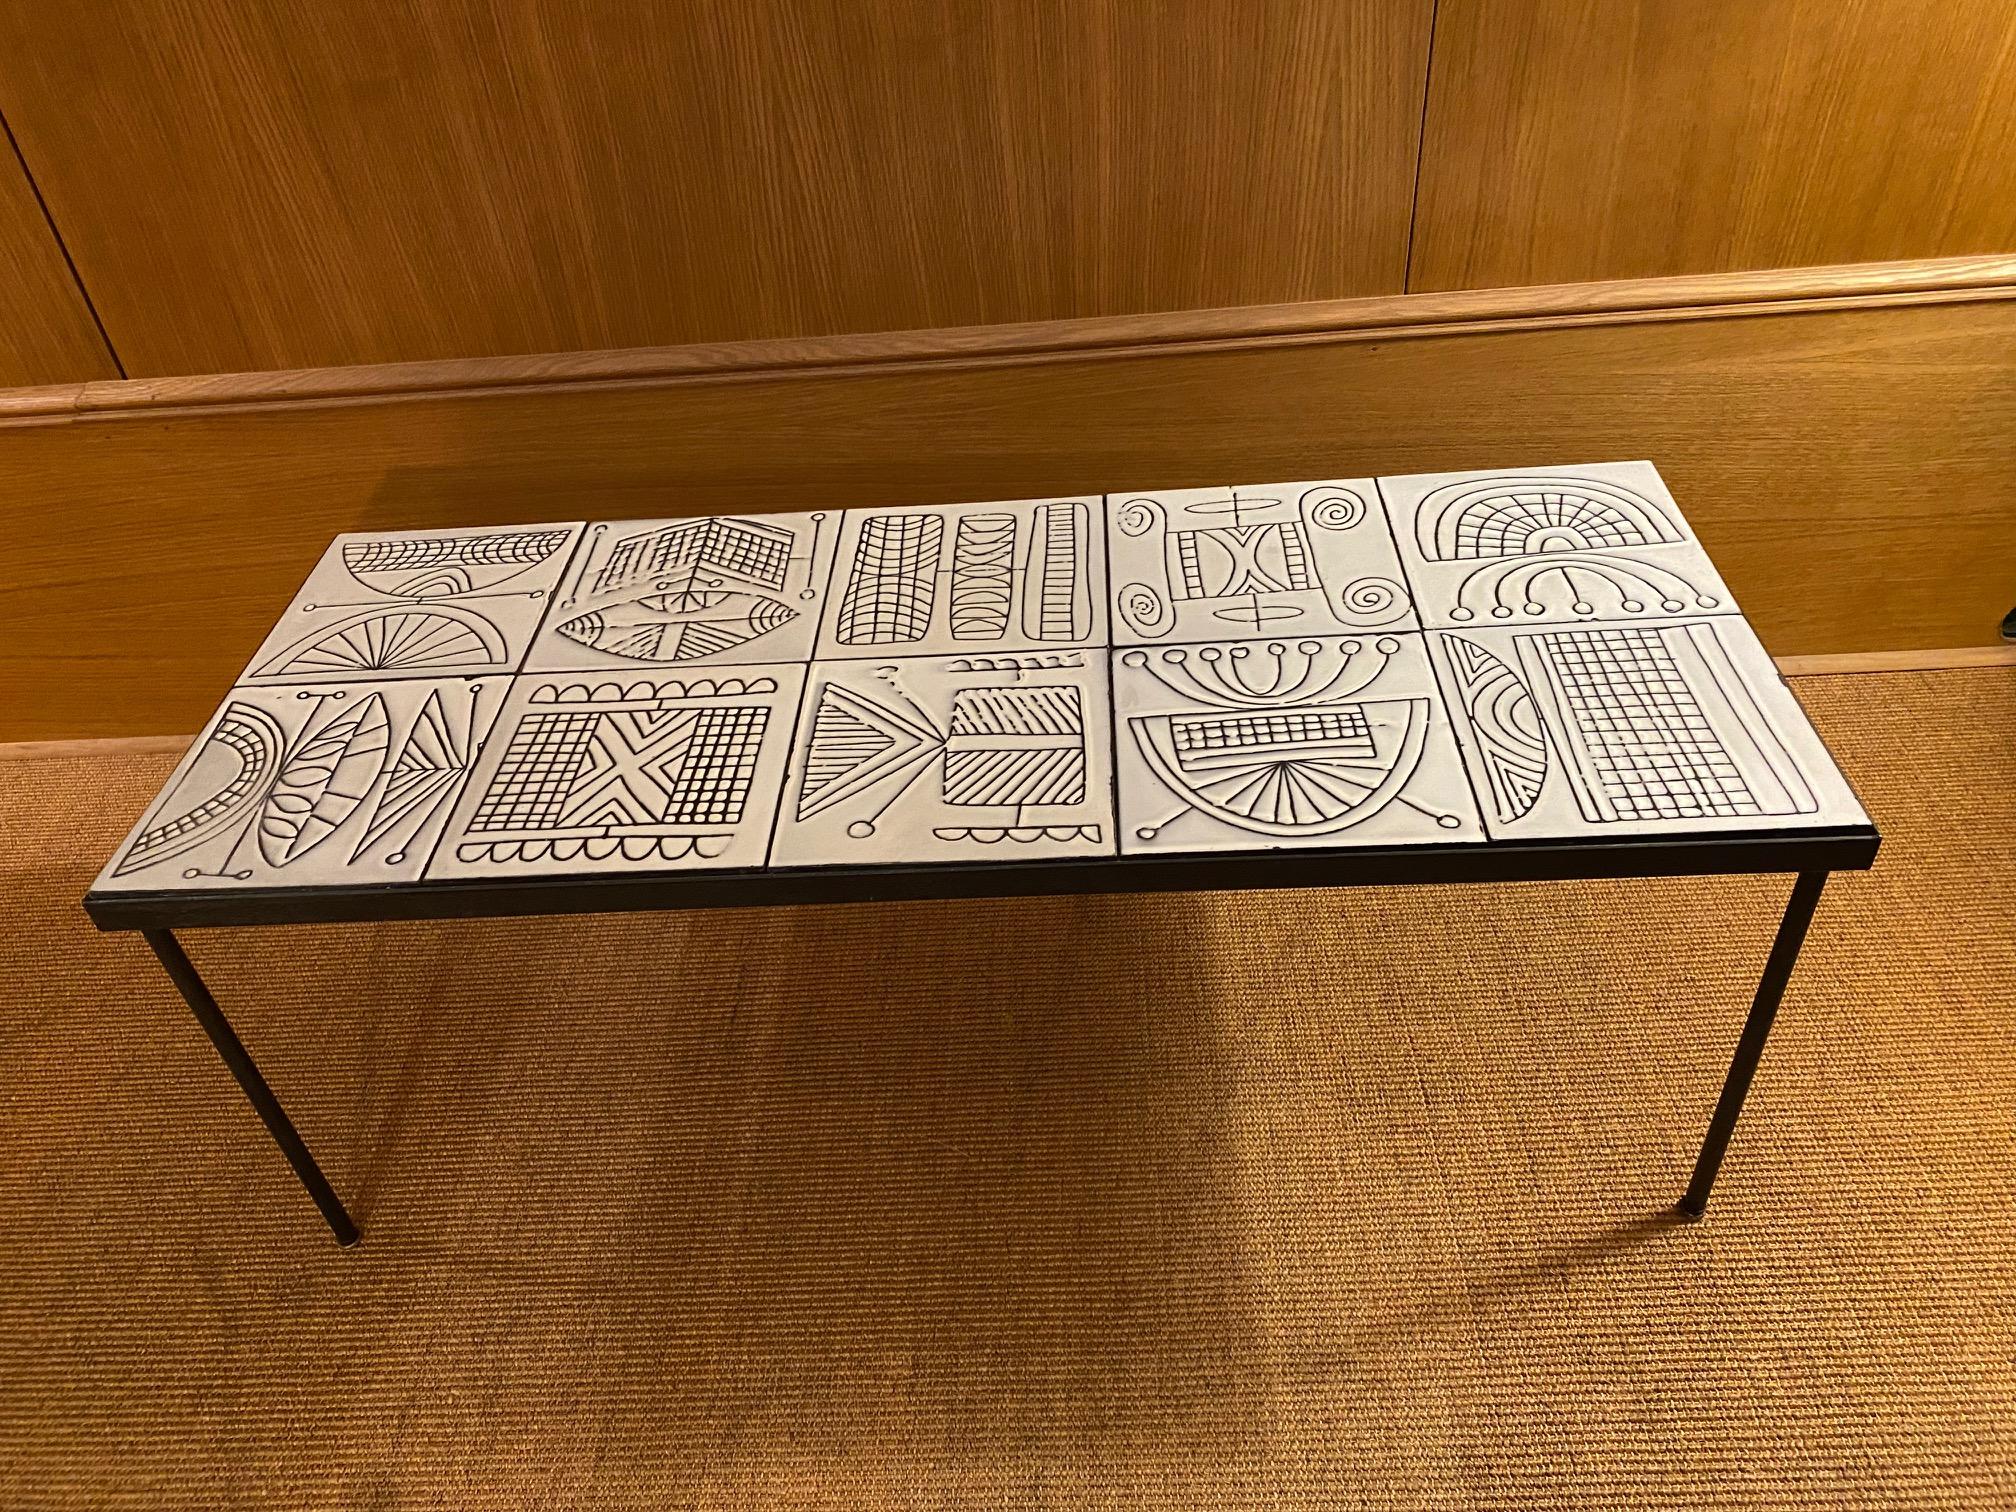 French Ceramic Coffee table by Roger Capron, France, 1960s